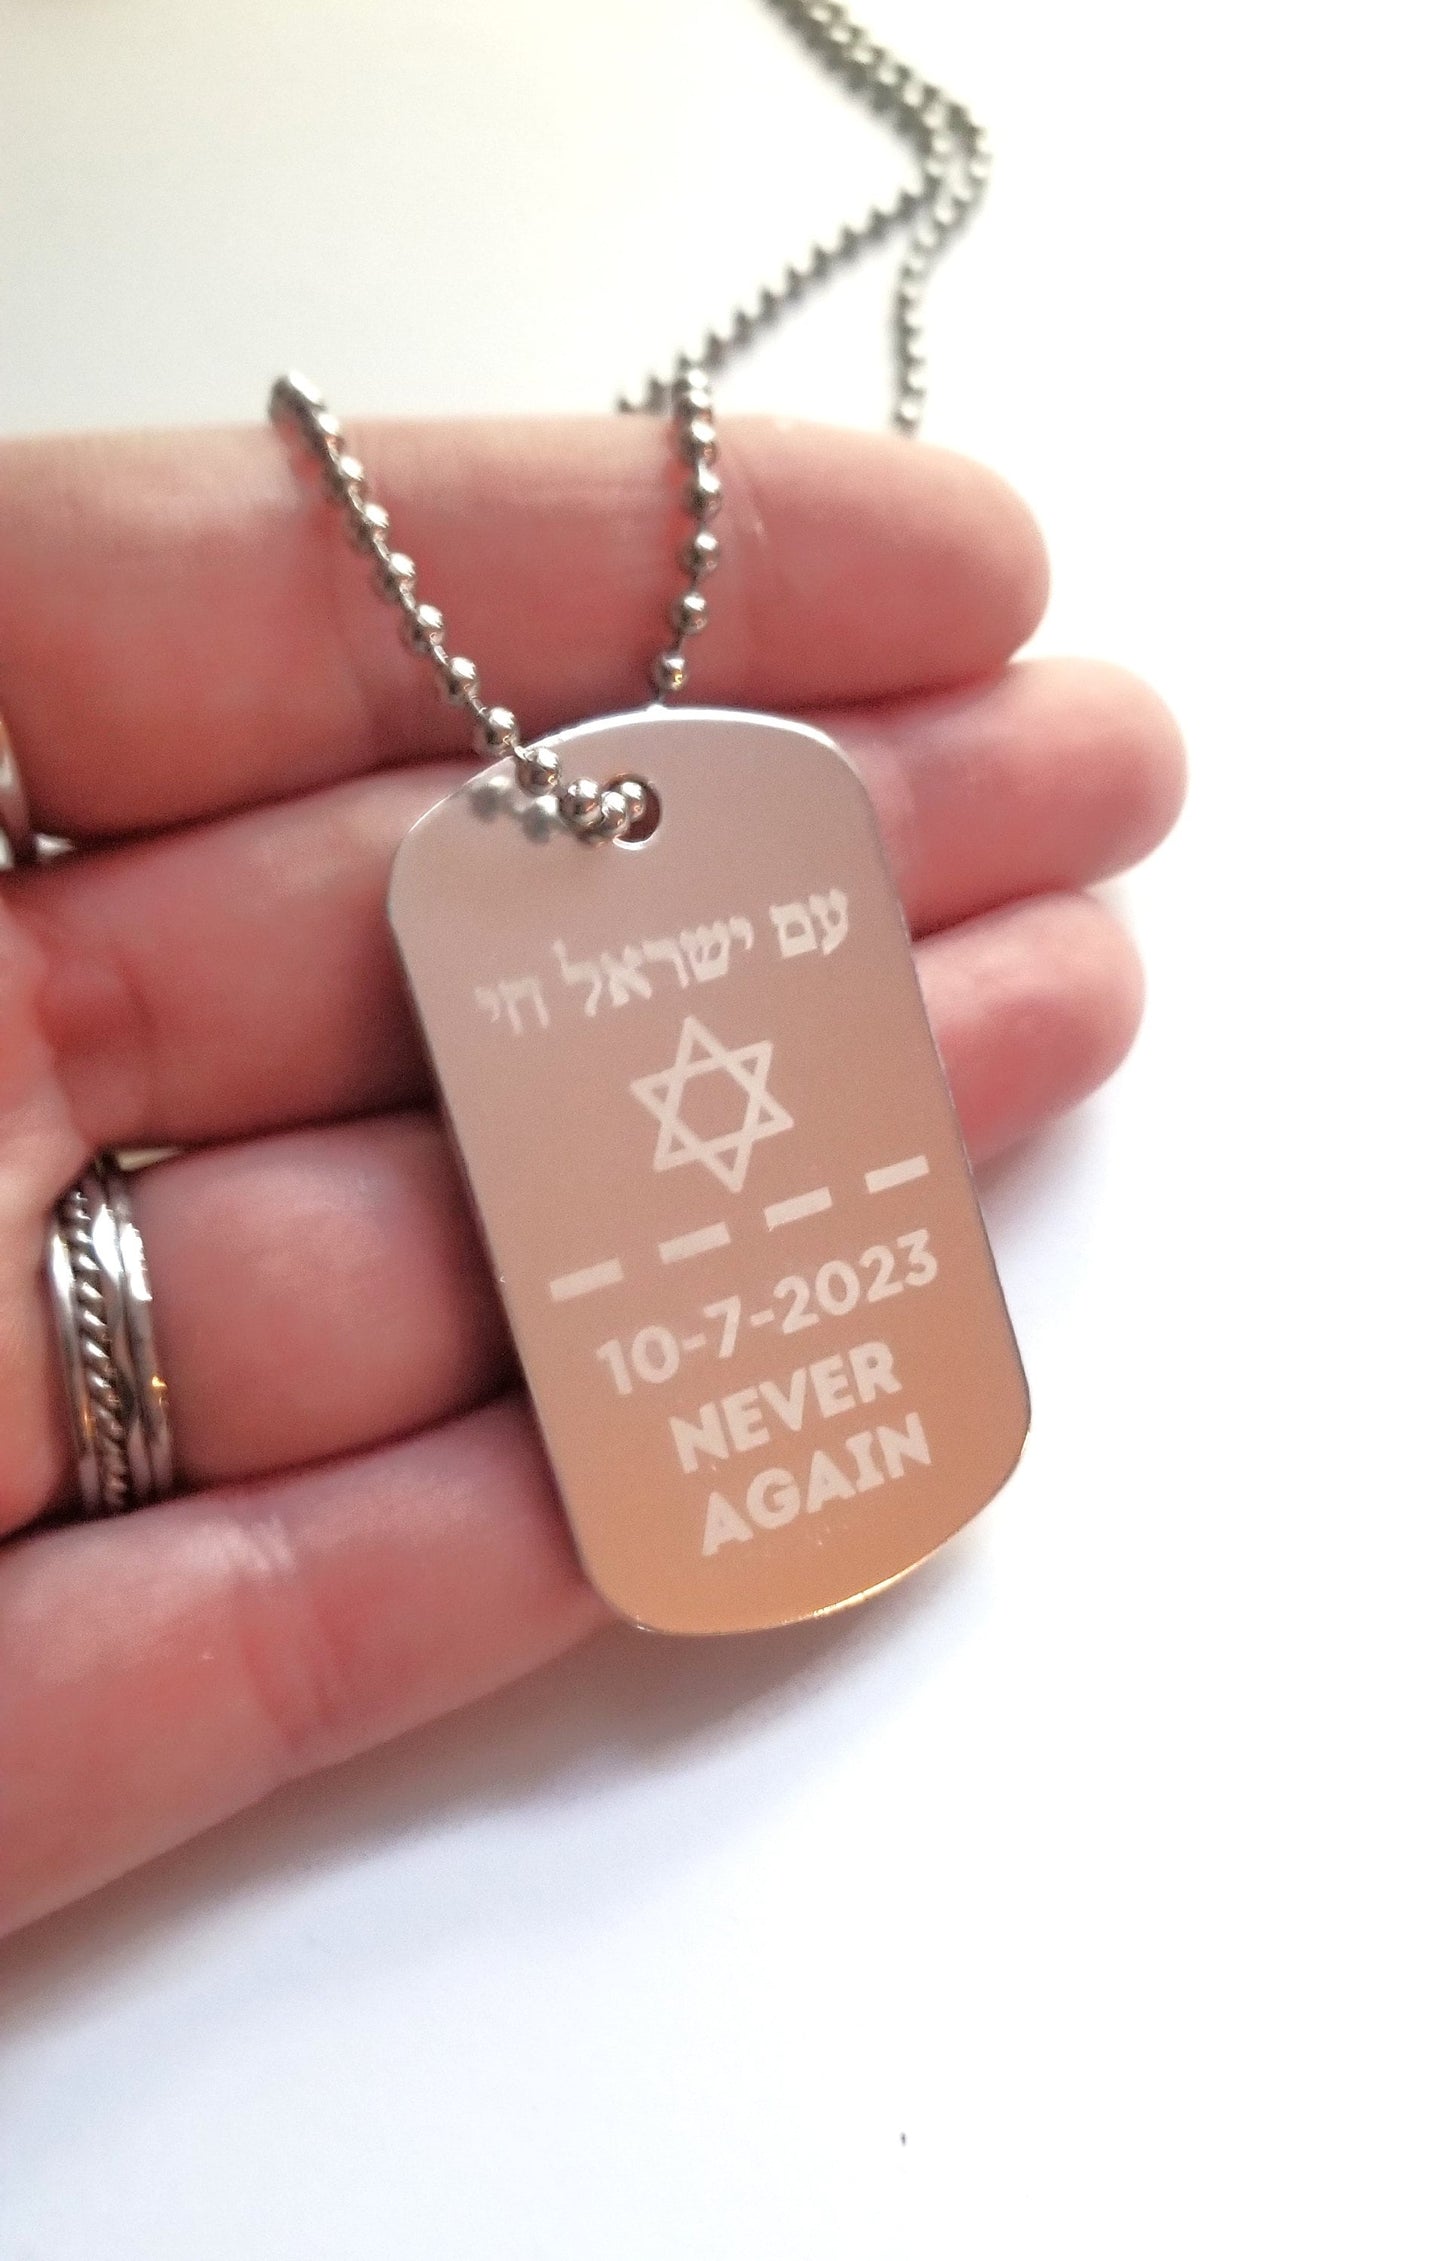 Am Israel Chai Military tag, Israeli military army necklace in black or silver, Hebrew Jewelry, Stand with Israel, Never again Jewish gift